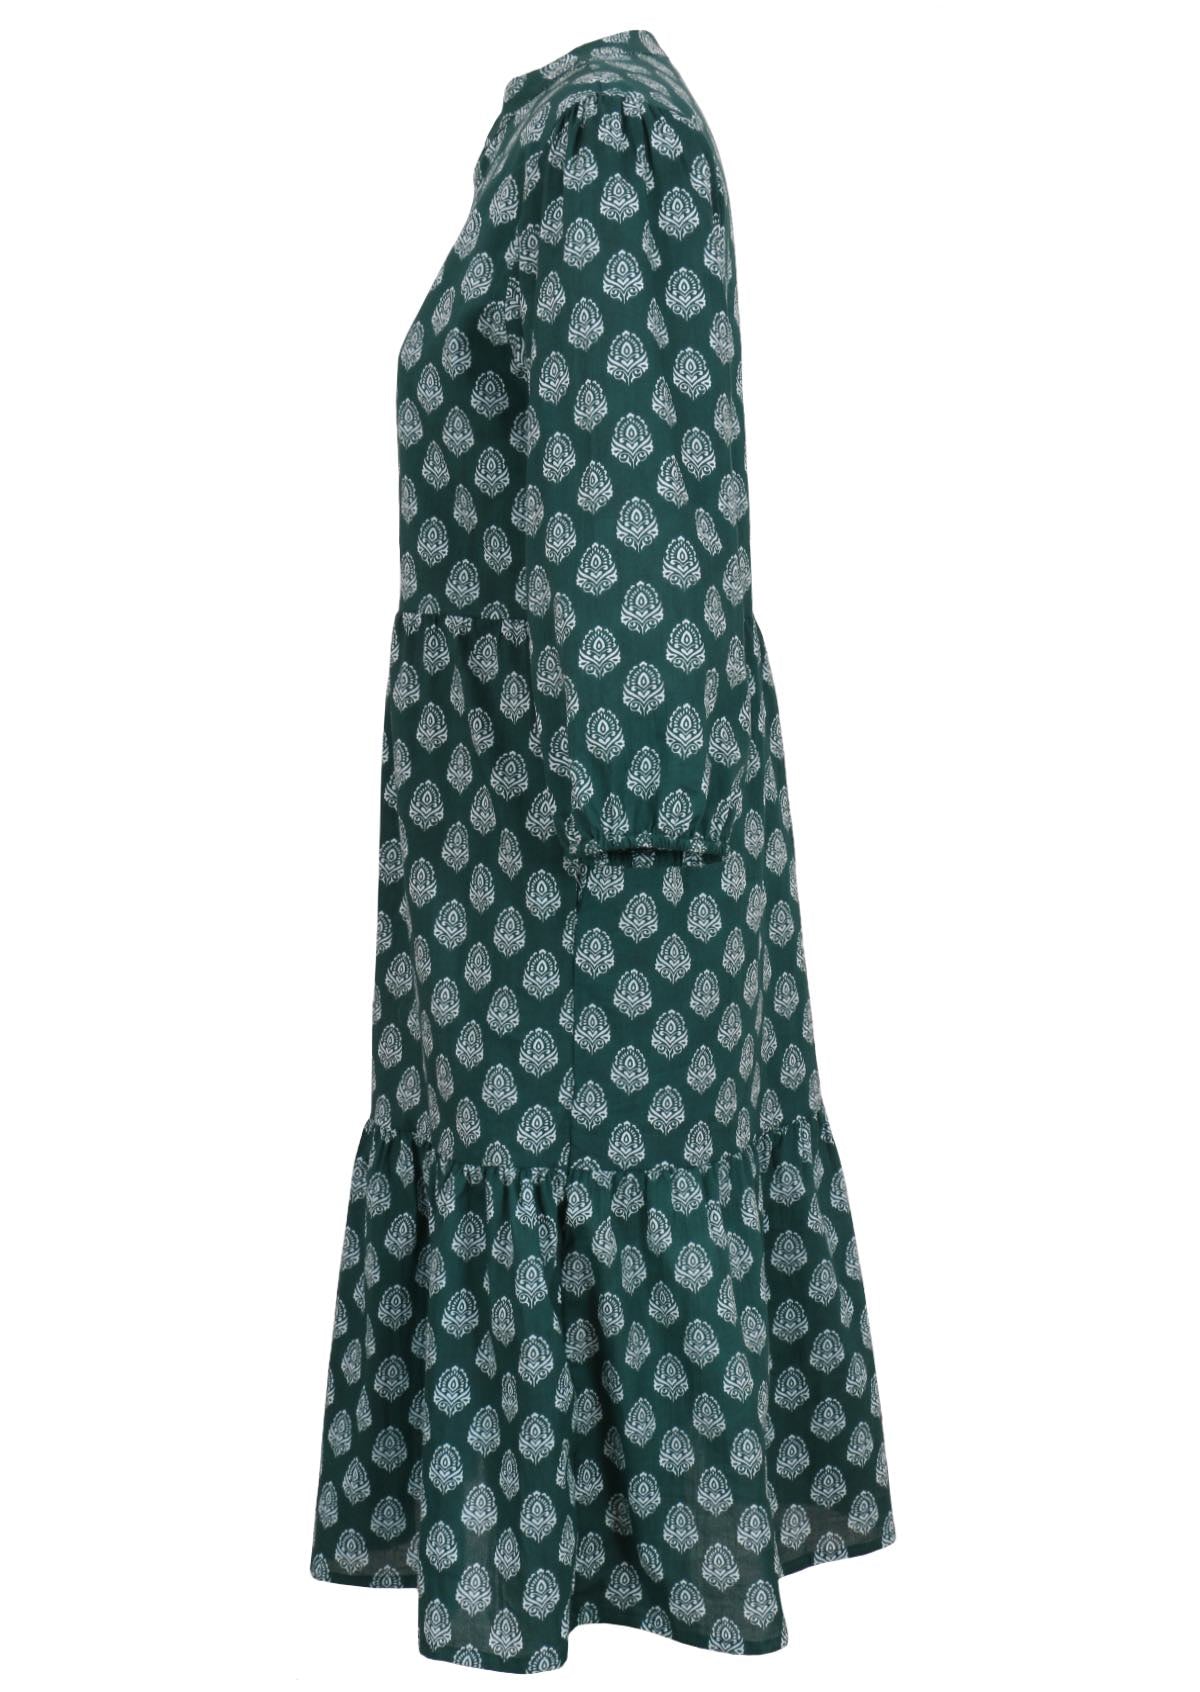 Dark green cotton tiered midi dress with 3/4 sleeves